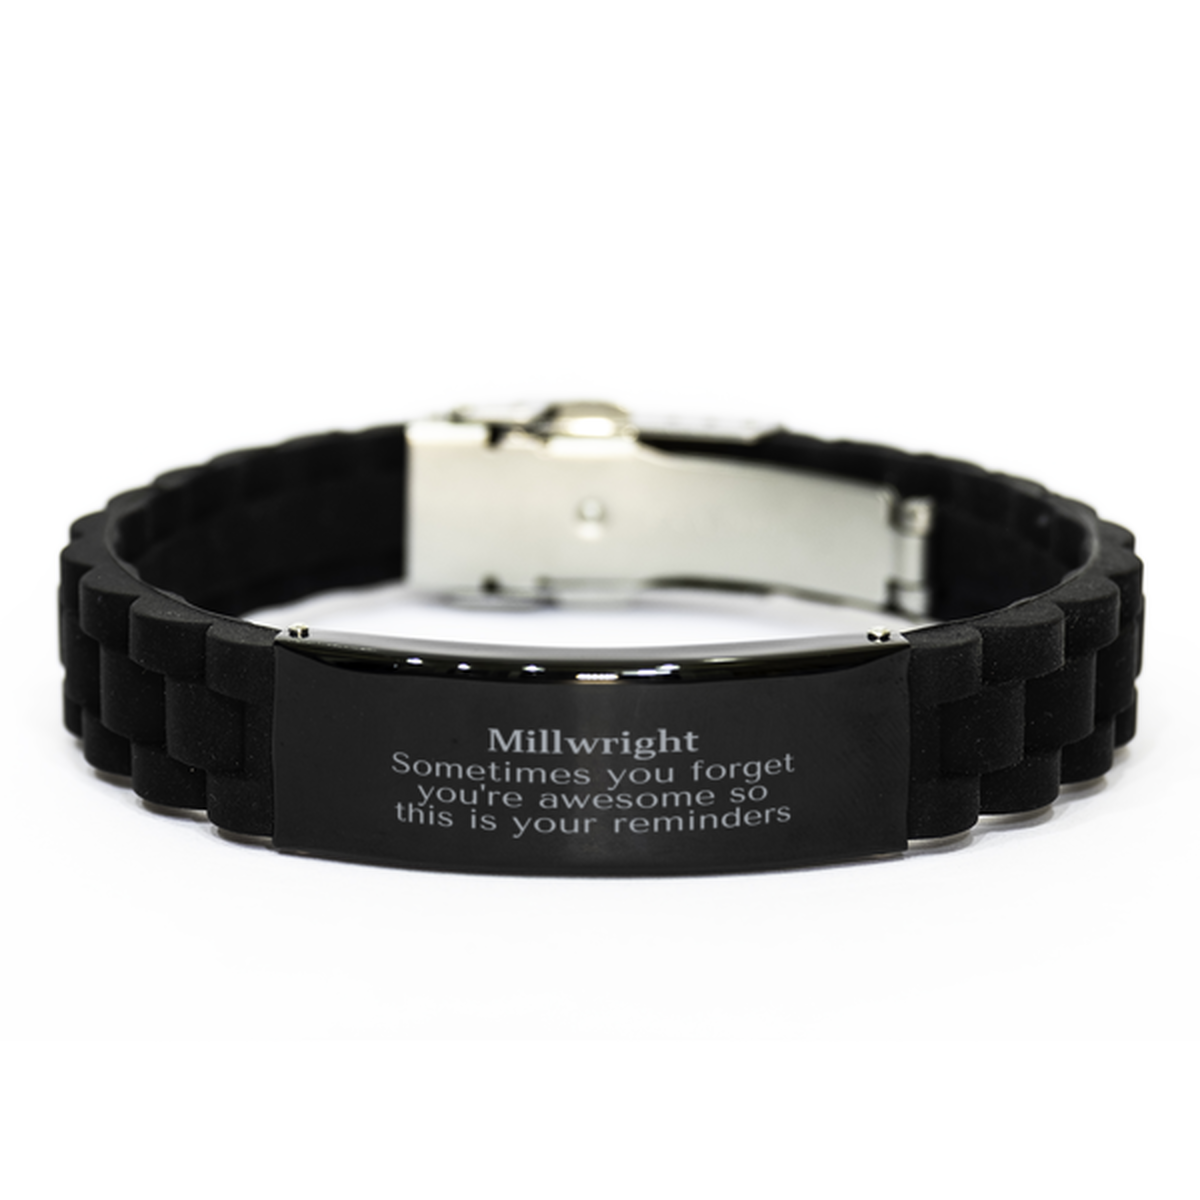 Sentimental Millwright Black Glidelock Clasp Bracelet, Millwright Sometimes you forget you're awesome so this is your reminders, Graduation Christmas Birthday Gifts for Millwright, Men, Women, Coworkers